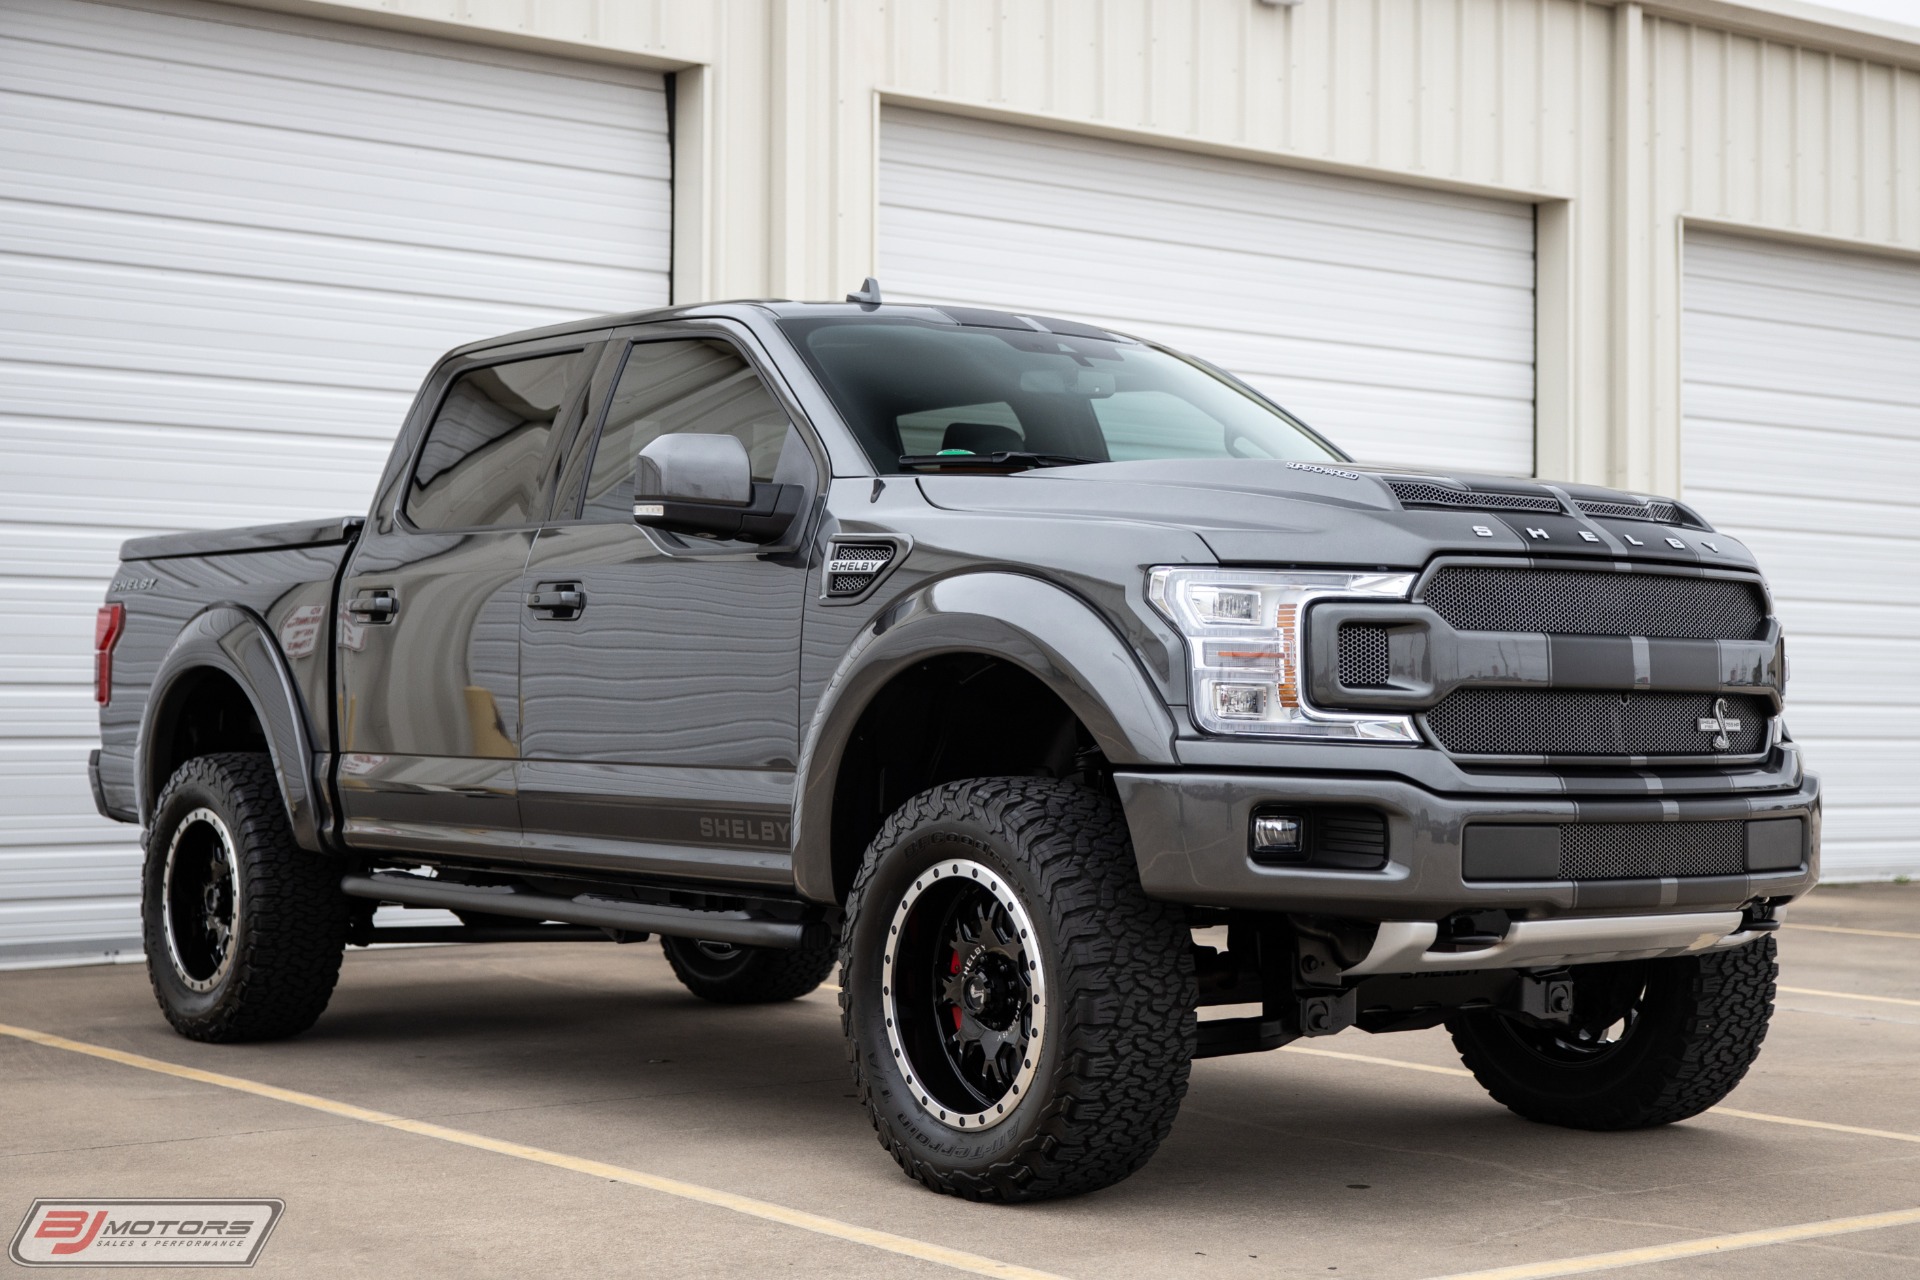 Used 2018 Ford F-150 Shelby 755HP Supercharged For Sale (Special